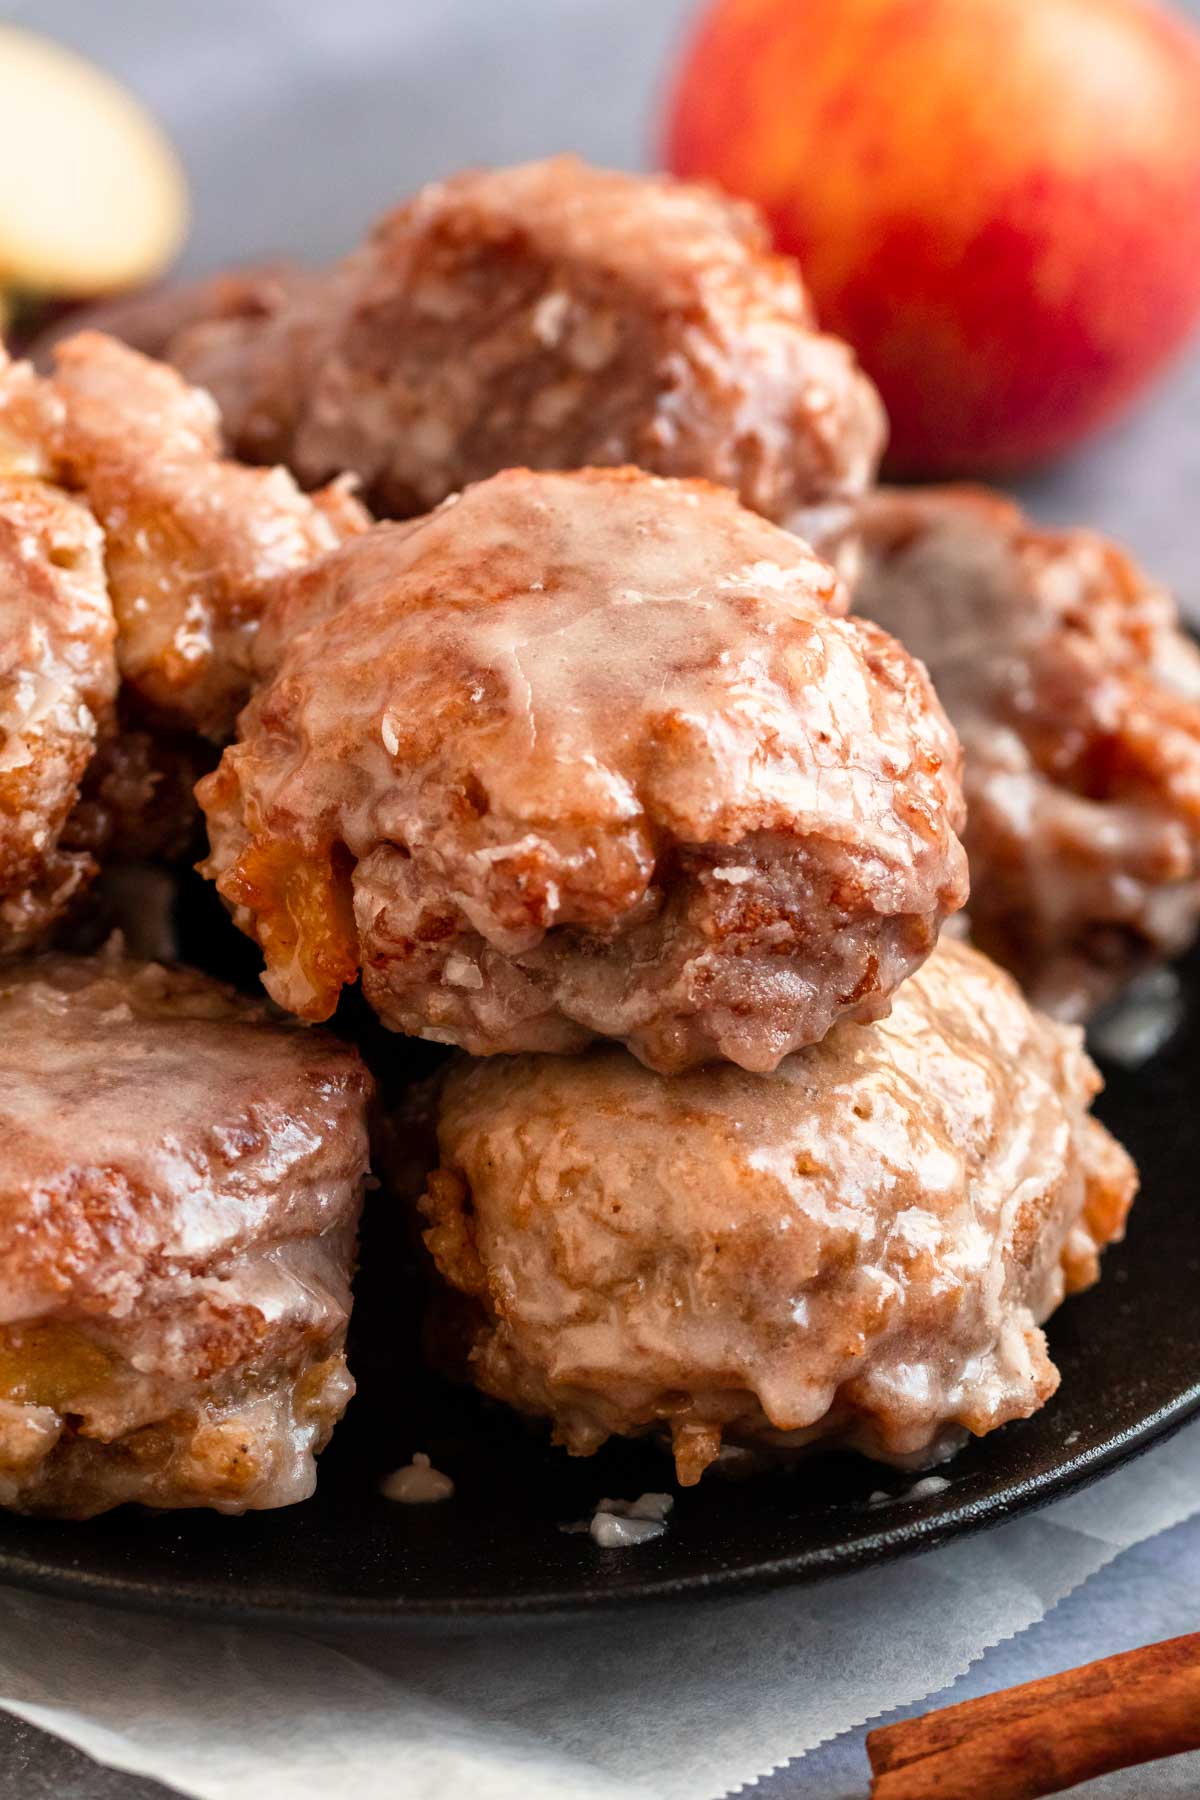 Apple fritters on a plate.